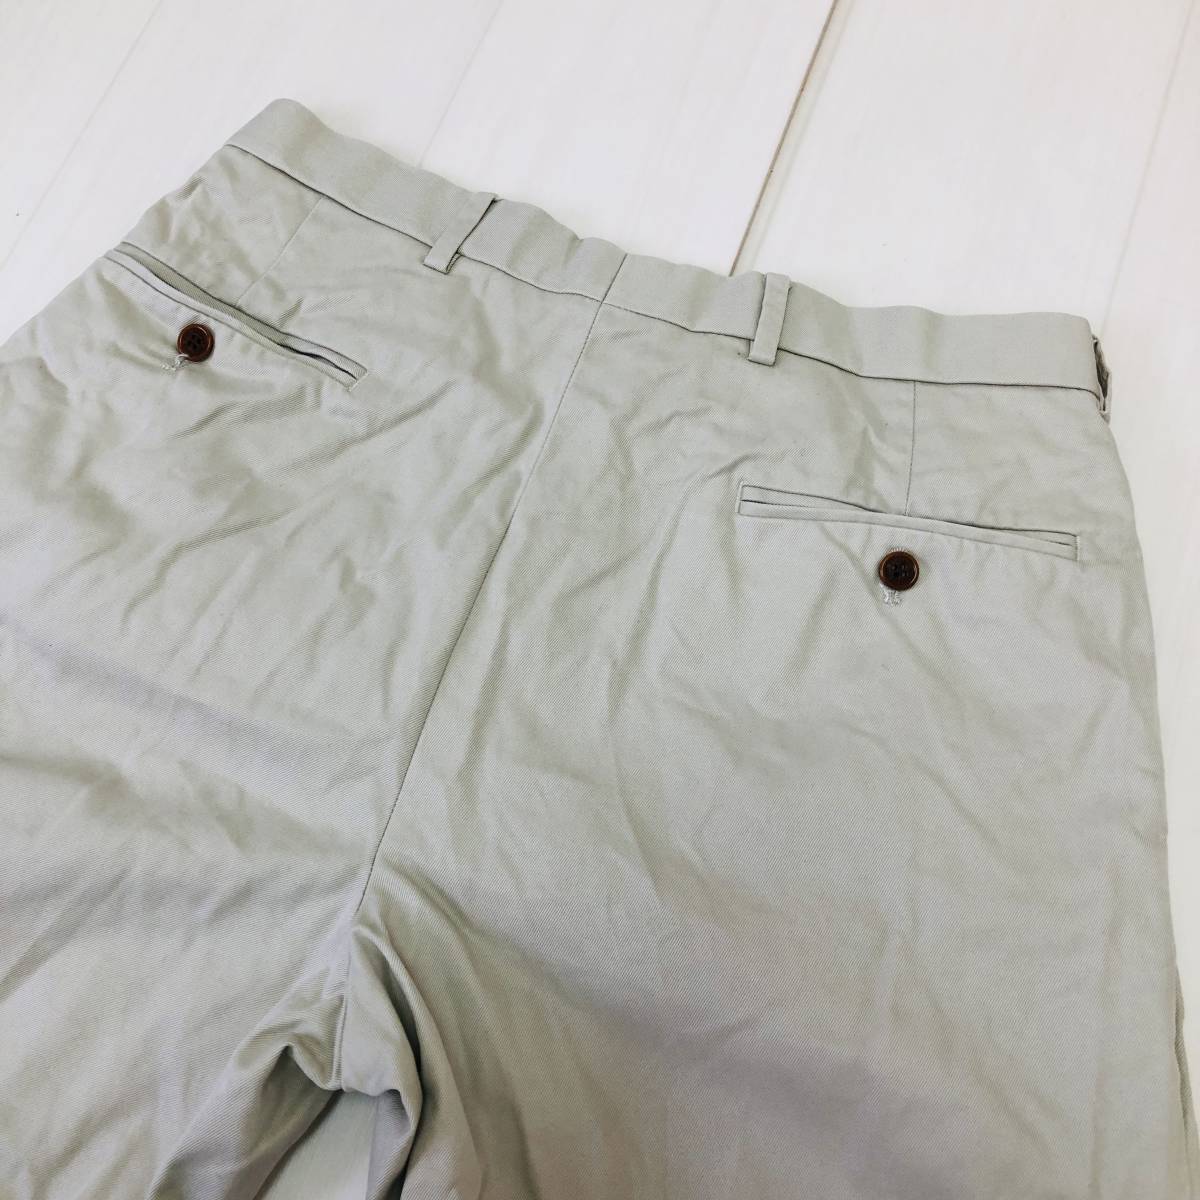 k2191 beautiful goods 346 BROOKS BROTHERS Brooks Brothers pants cotton 100% chinos W33 L30 beige Basic casual style 